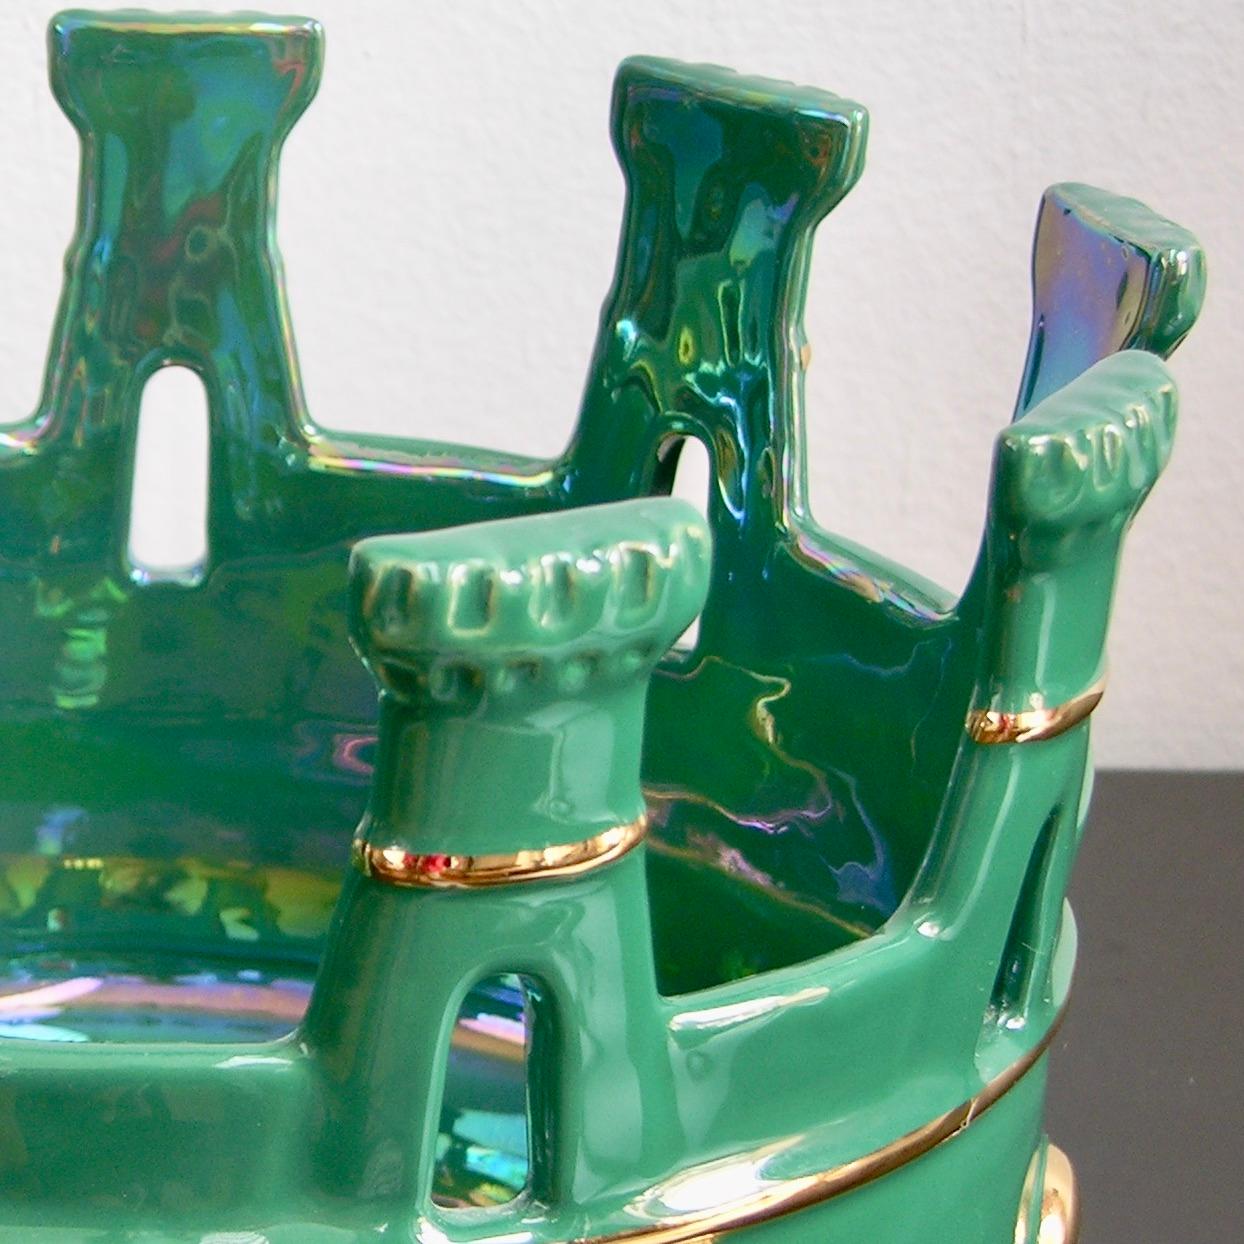 Italian contemporary post-modern Work of Art in the shape of a castle crown in majolica, exclusive design by Ceramica Gatti, an Art Studio of long tradition and Designer Ettore Sottsass' favorite. This piece is distinguished by a refined hand